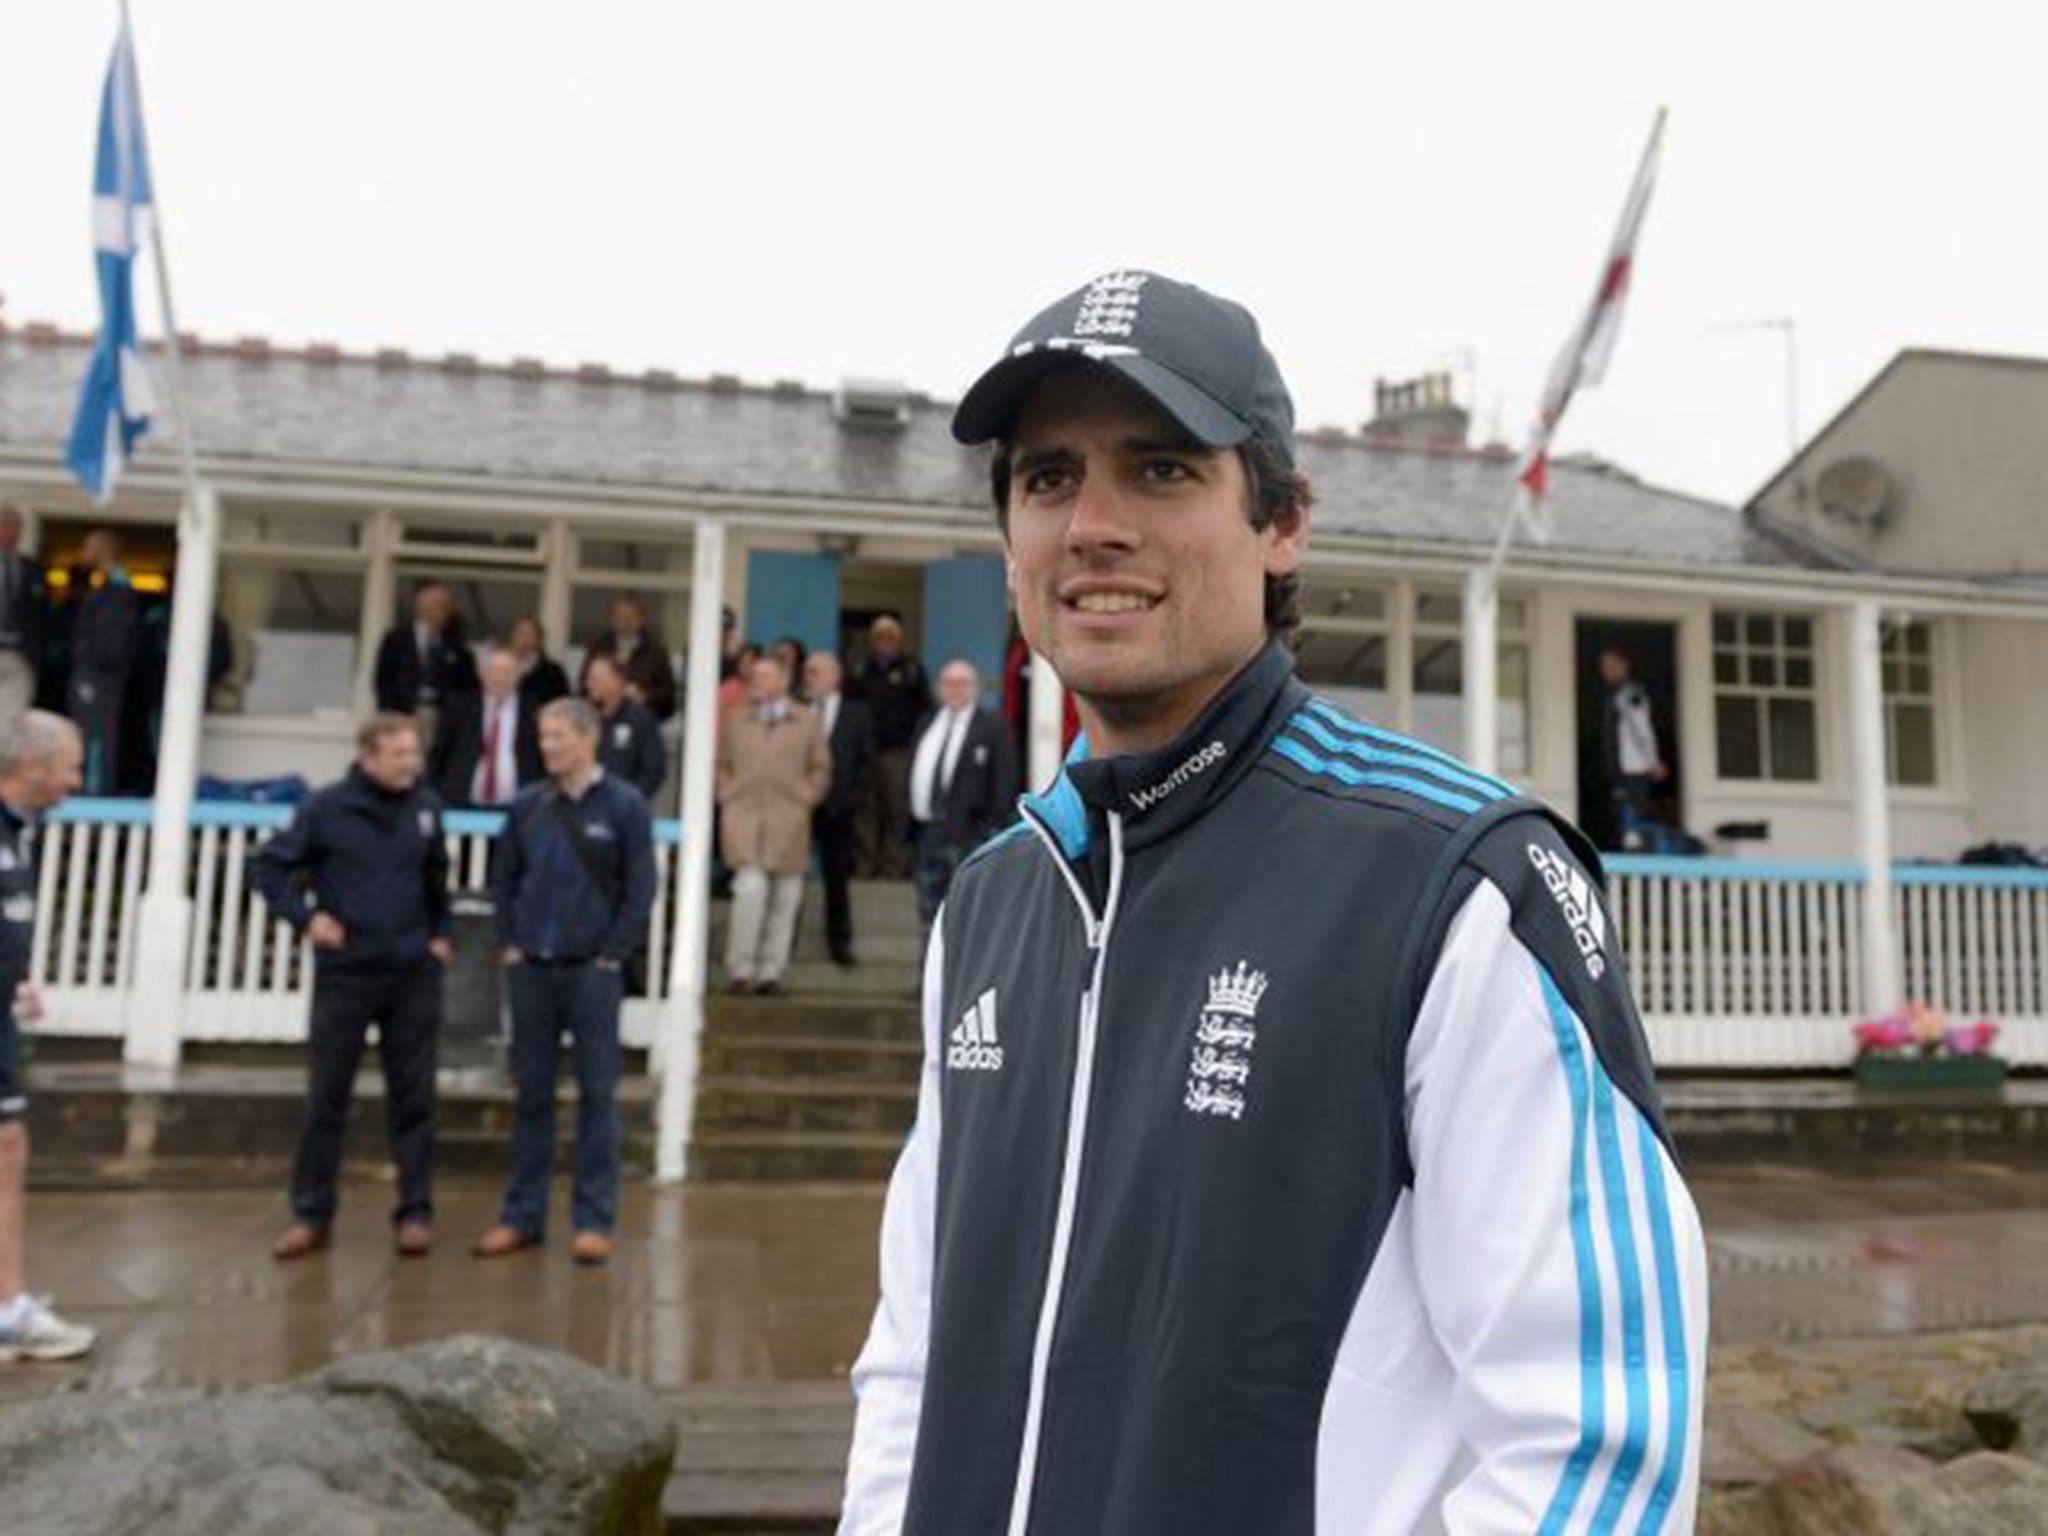 Alastair Cook (right) can now come into his own following long-standing coach Andy Flower’s decision to step down